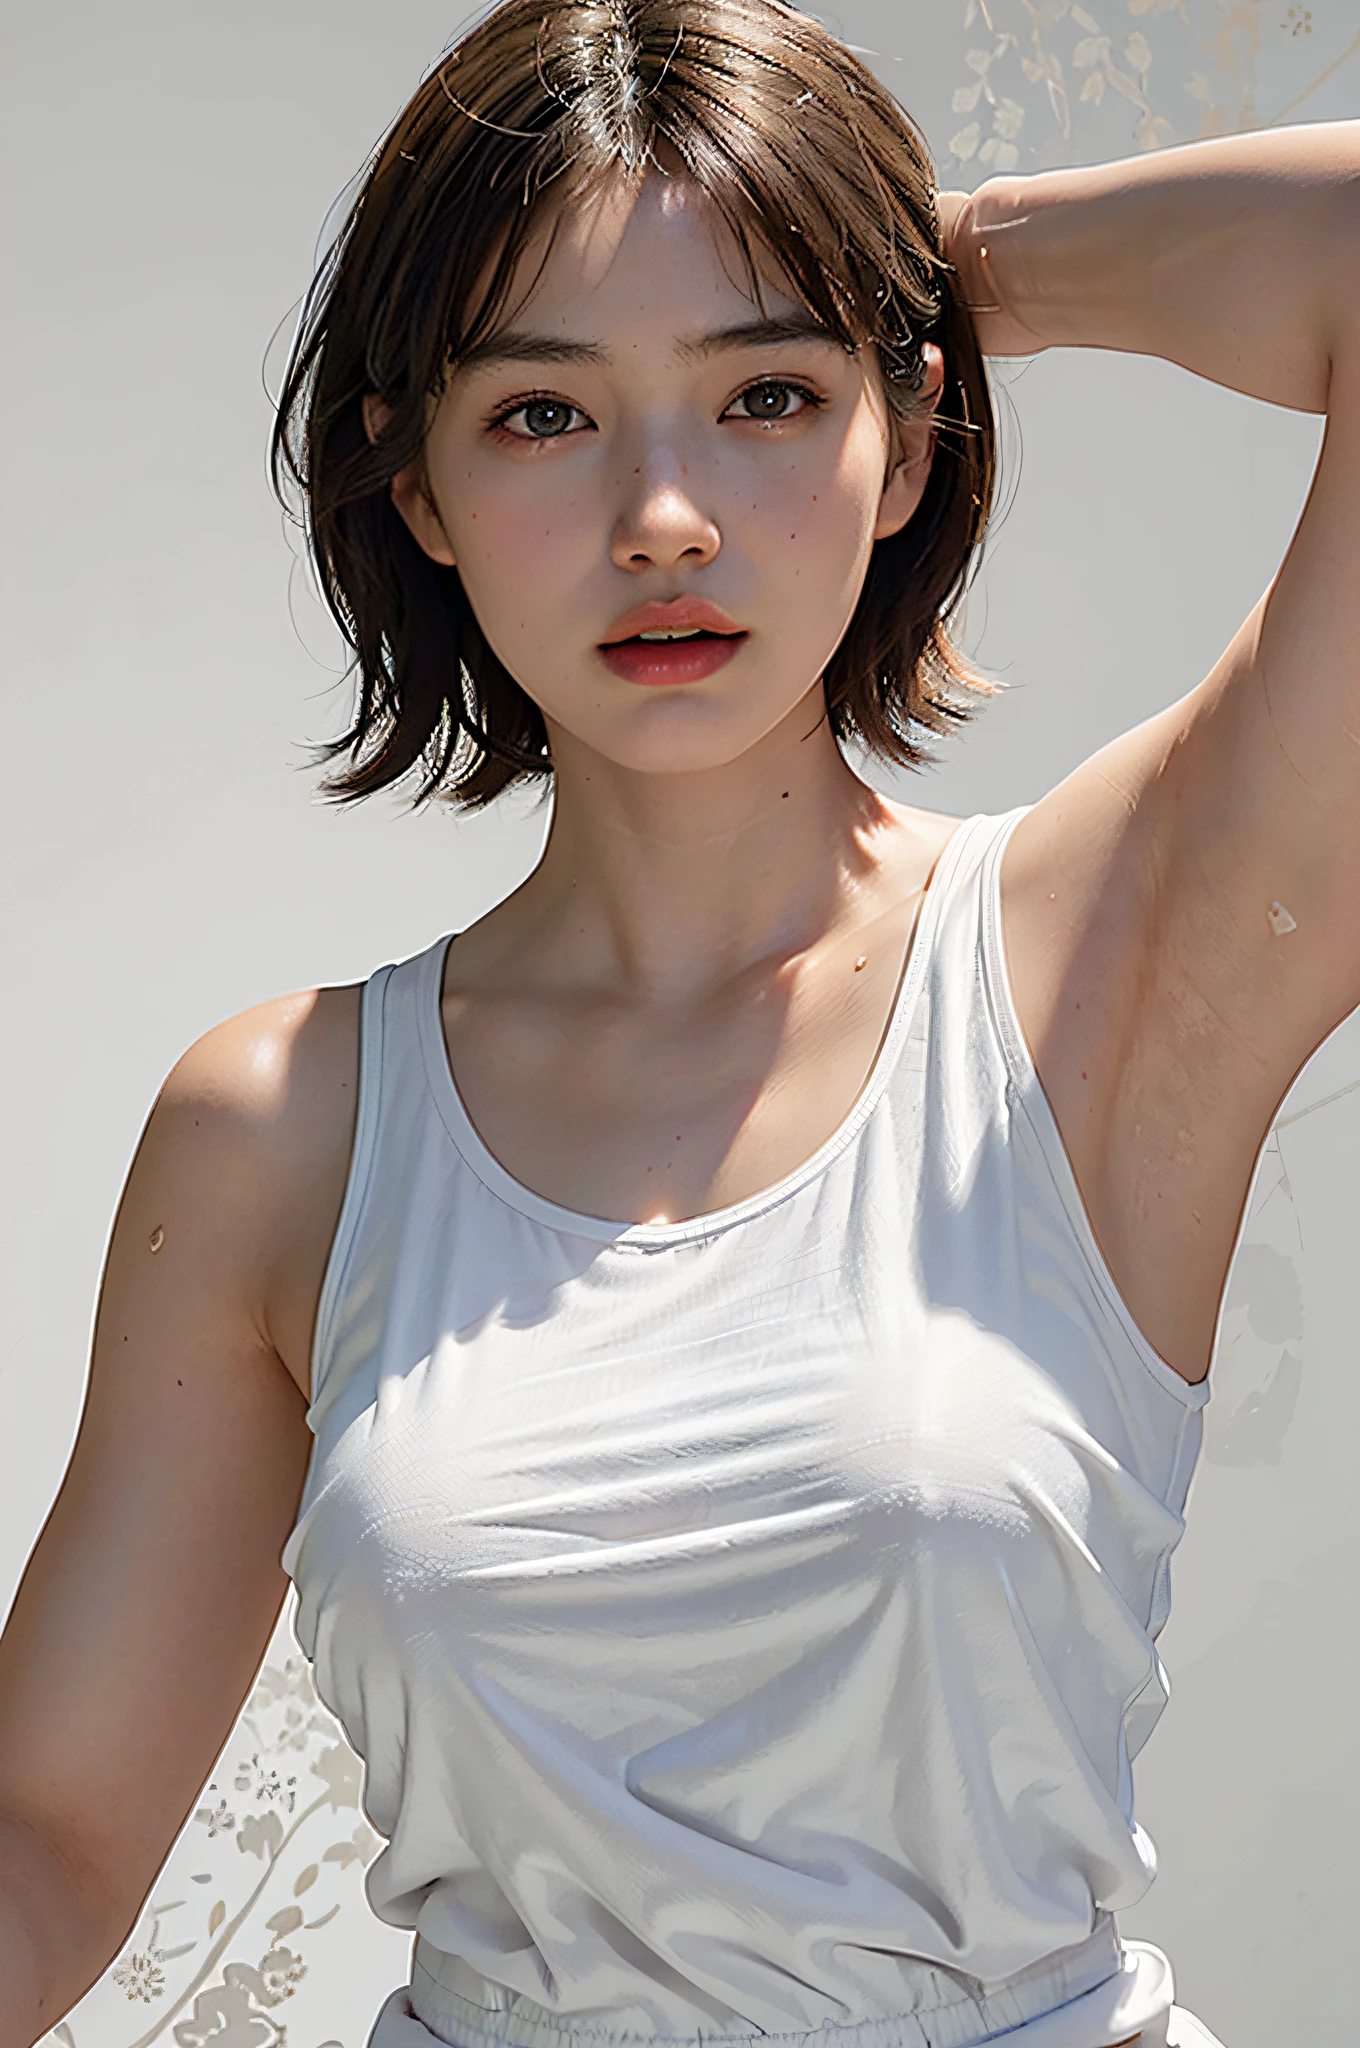 (Ultra Real), (Illustration), (High Resolution), (8K), (Very Detailed), (Best Illustration), (Beautiful Detailed Eyes), (Best Quality), (Ultra Detailed), (Masterpiece), (Wallpaper), (Detailed Face), Droopy Eyes, Sweaty, Upper Body Up, Armpits, Short Hair, Inner Color, Solo, Simple White Tank Top Girl, Japan Person, Big , (Camel Toe)